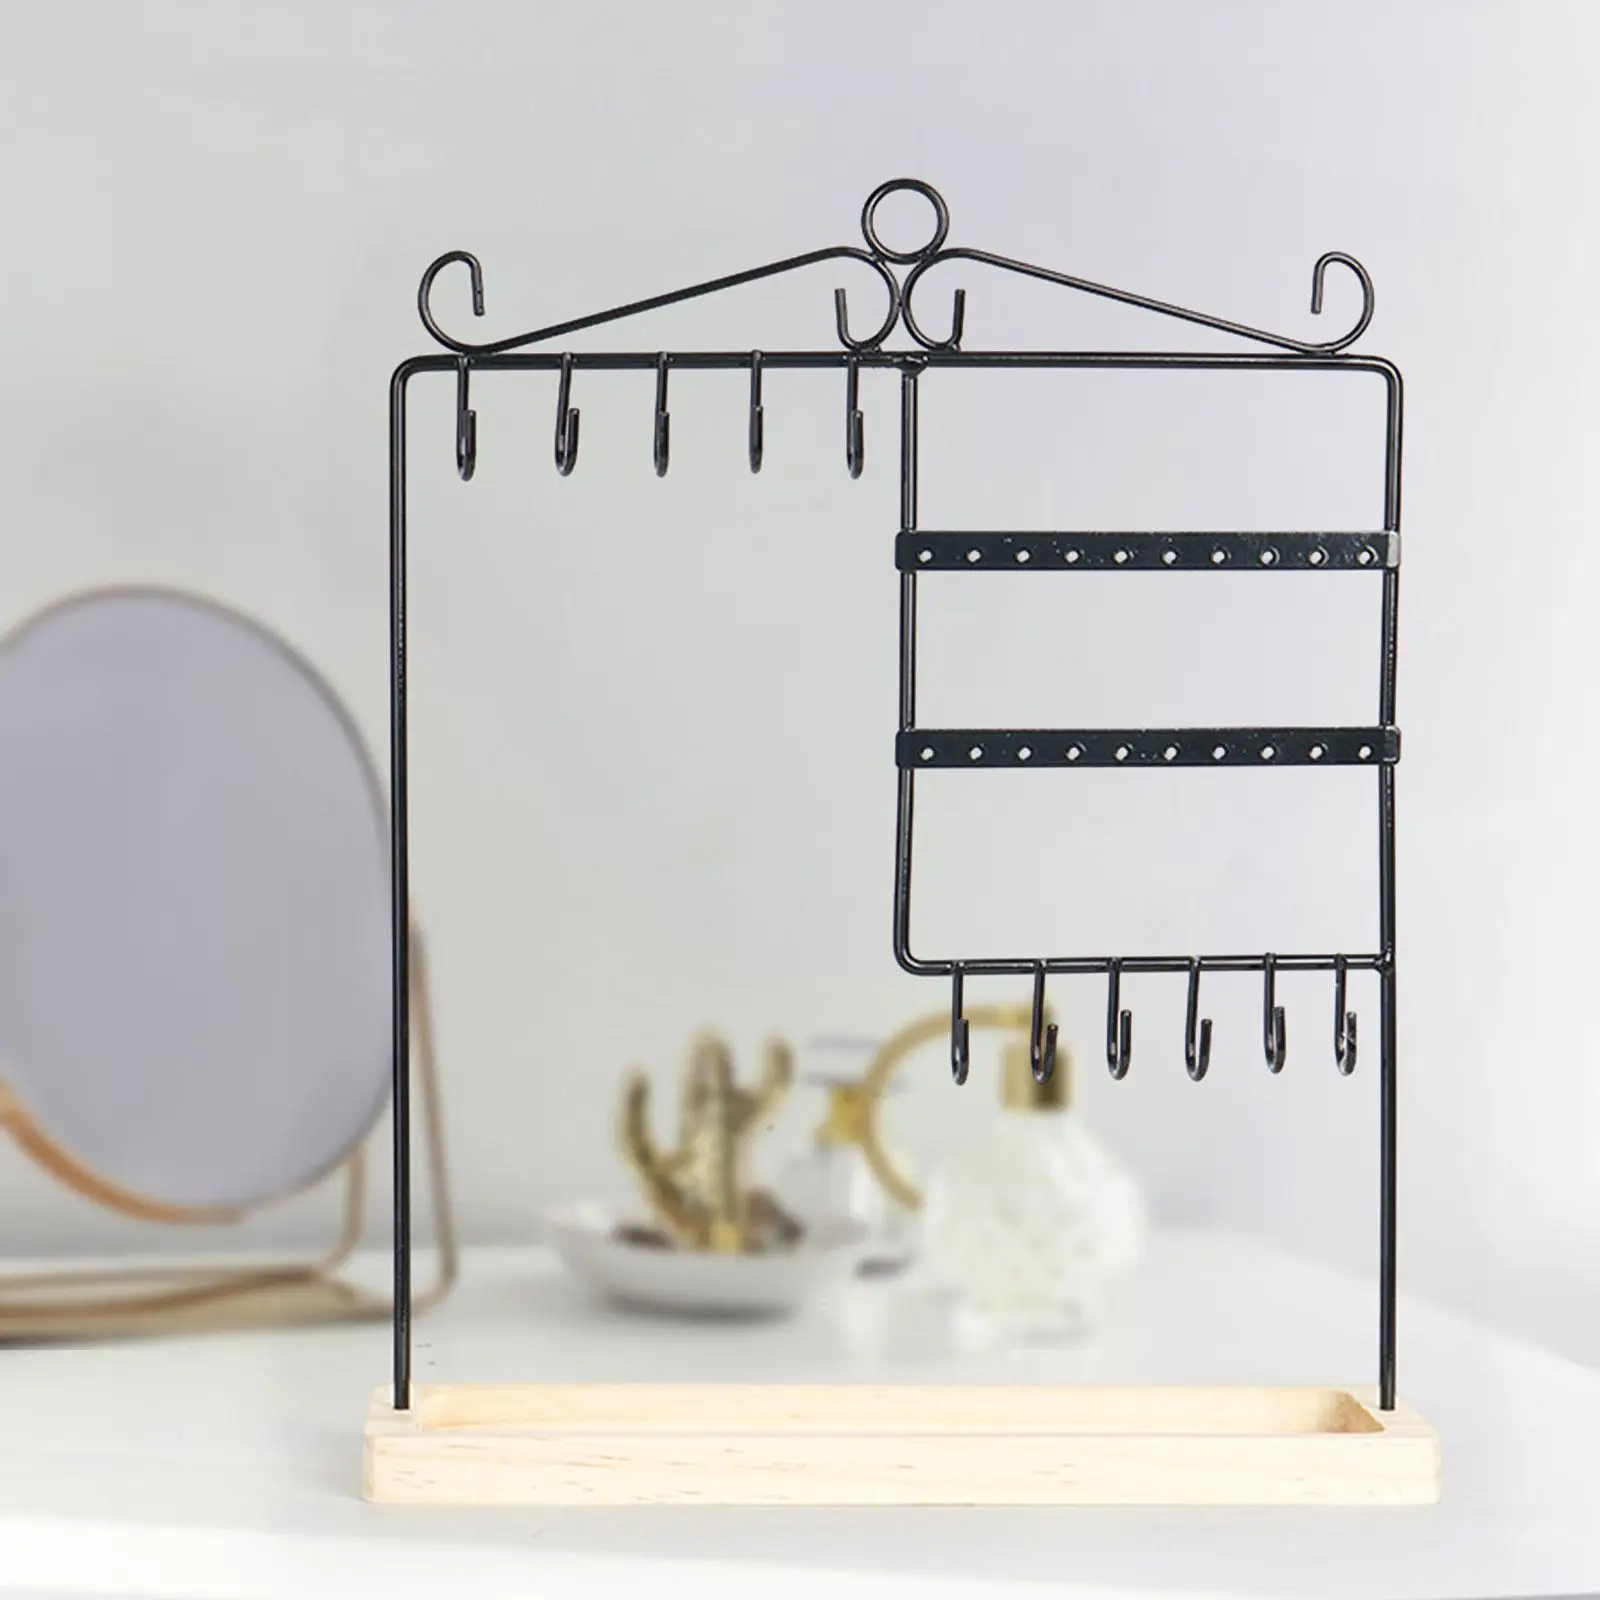 Jewelry Necklace Earring Display Detachable Jewelry Holder for Jewelry Props Dresser Photography Live Broadcast Shopping Mall